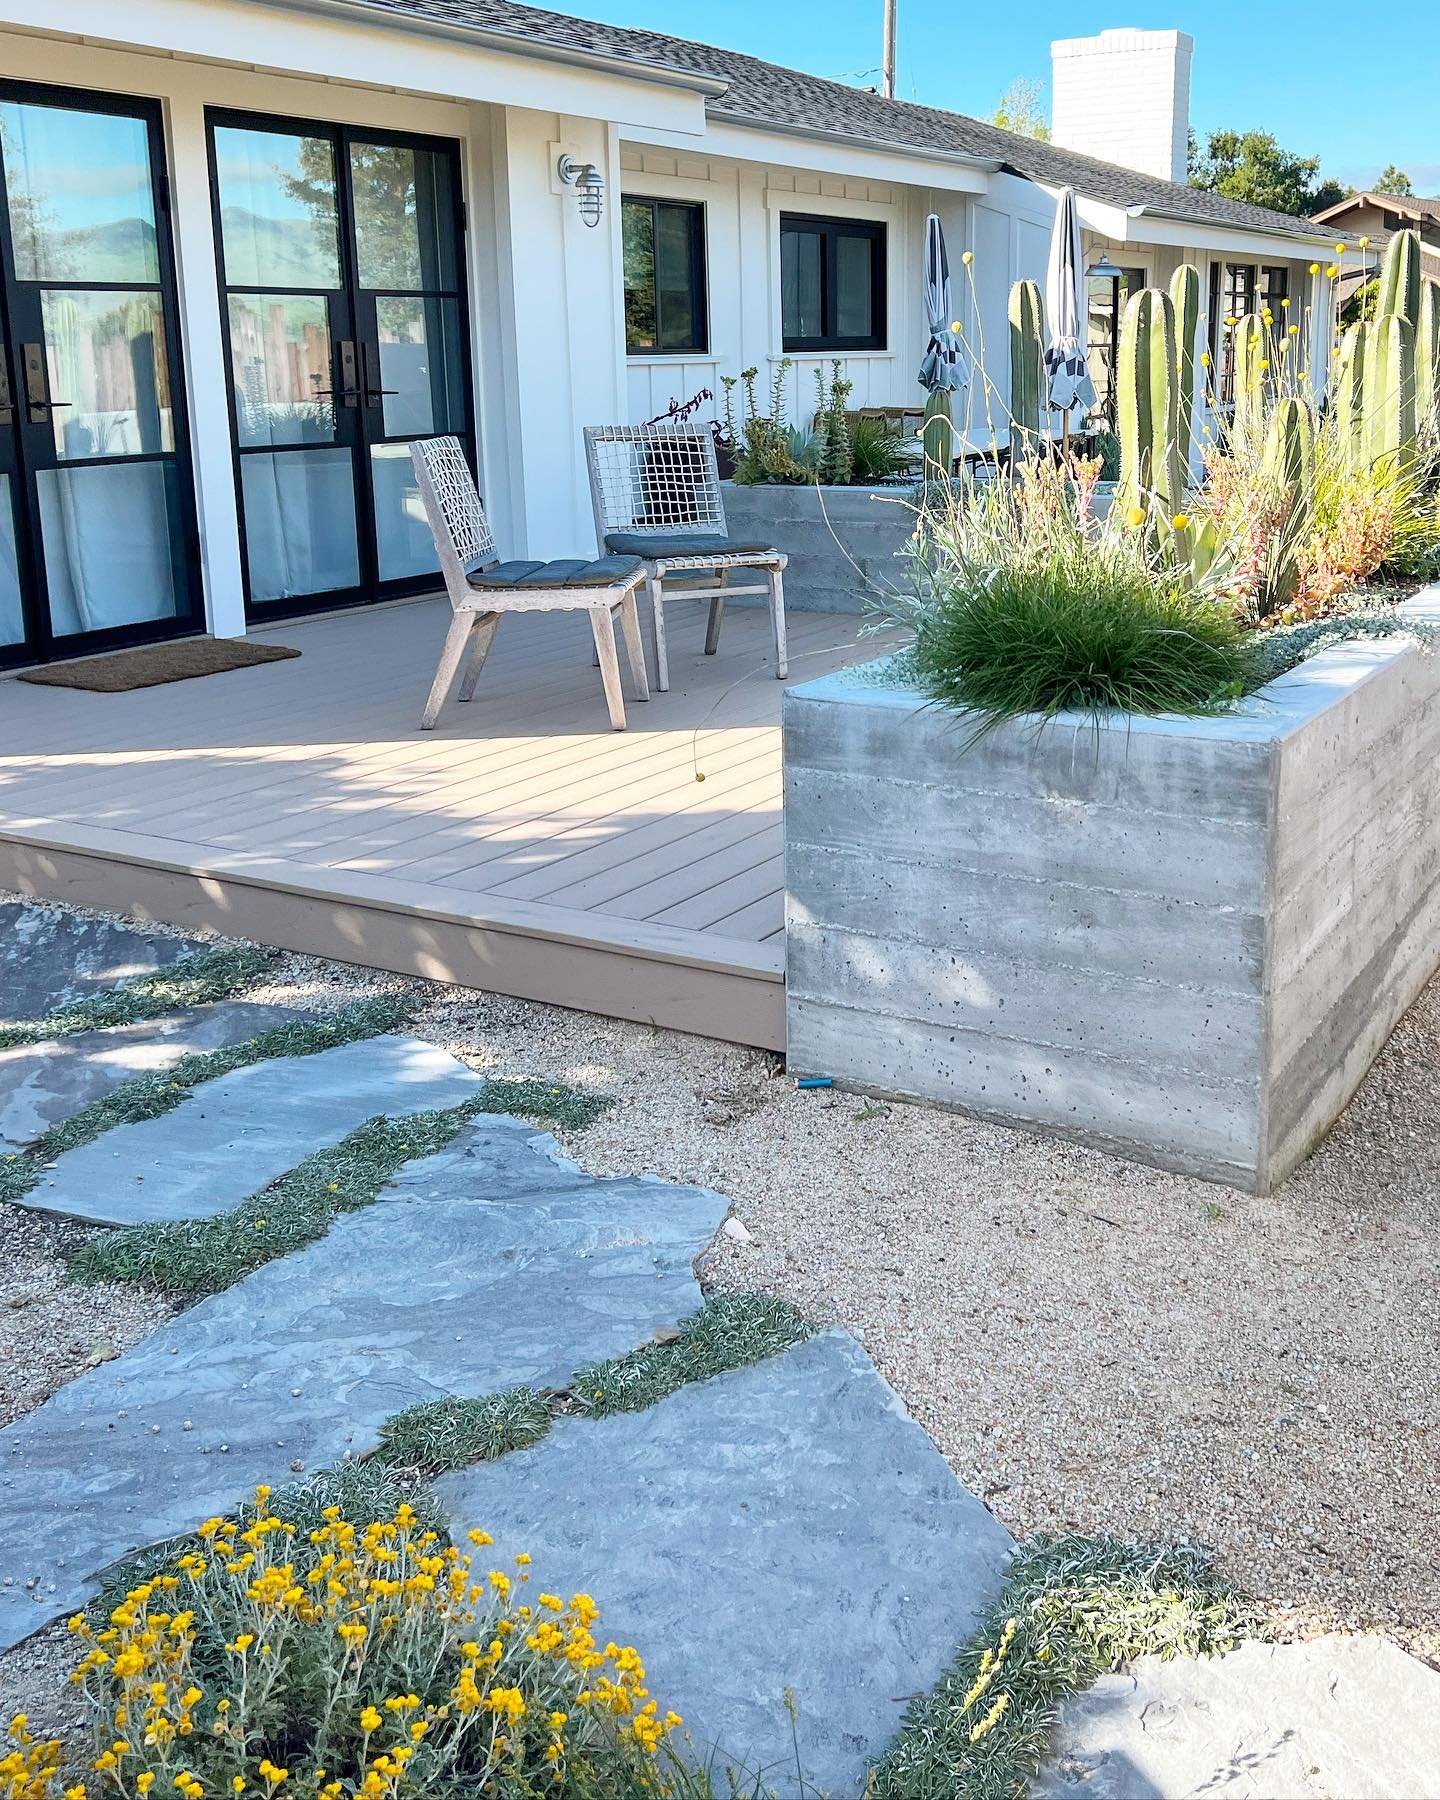 One moment amongst many at our recently completed  San Luis Obispo project. ✨
.
.
.
#landscapedesign #landscapedesigner #shareslo #805living #gardendesign #landscaperenovation #droughttolerant #designforliving #sunsetmag #sanluisobispo #californiades